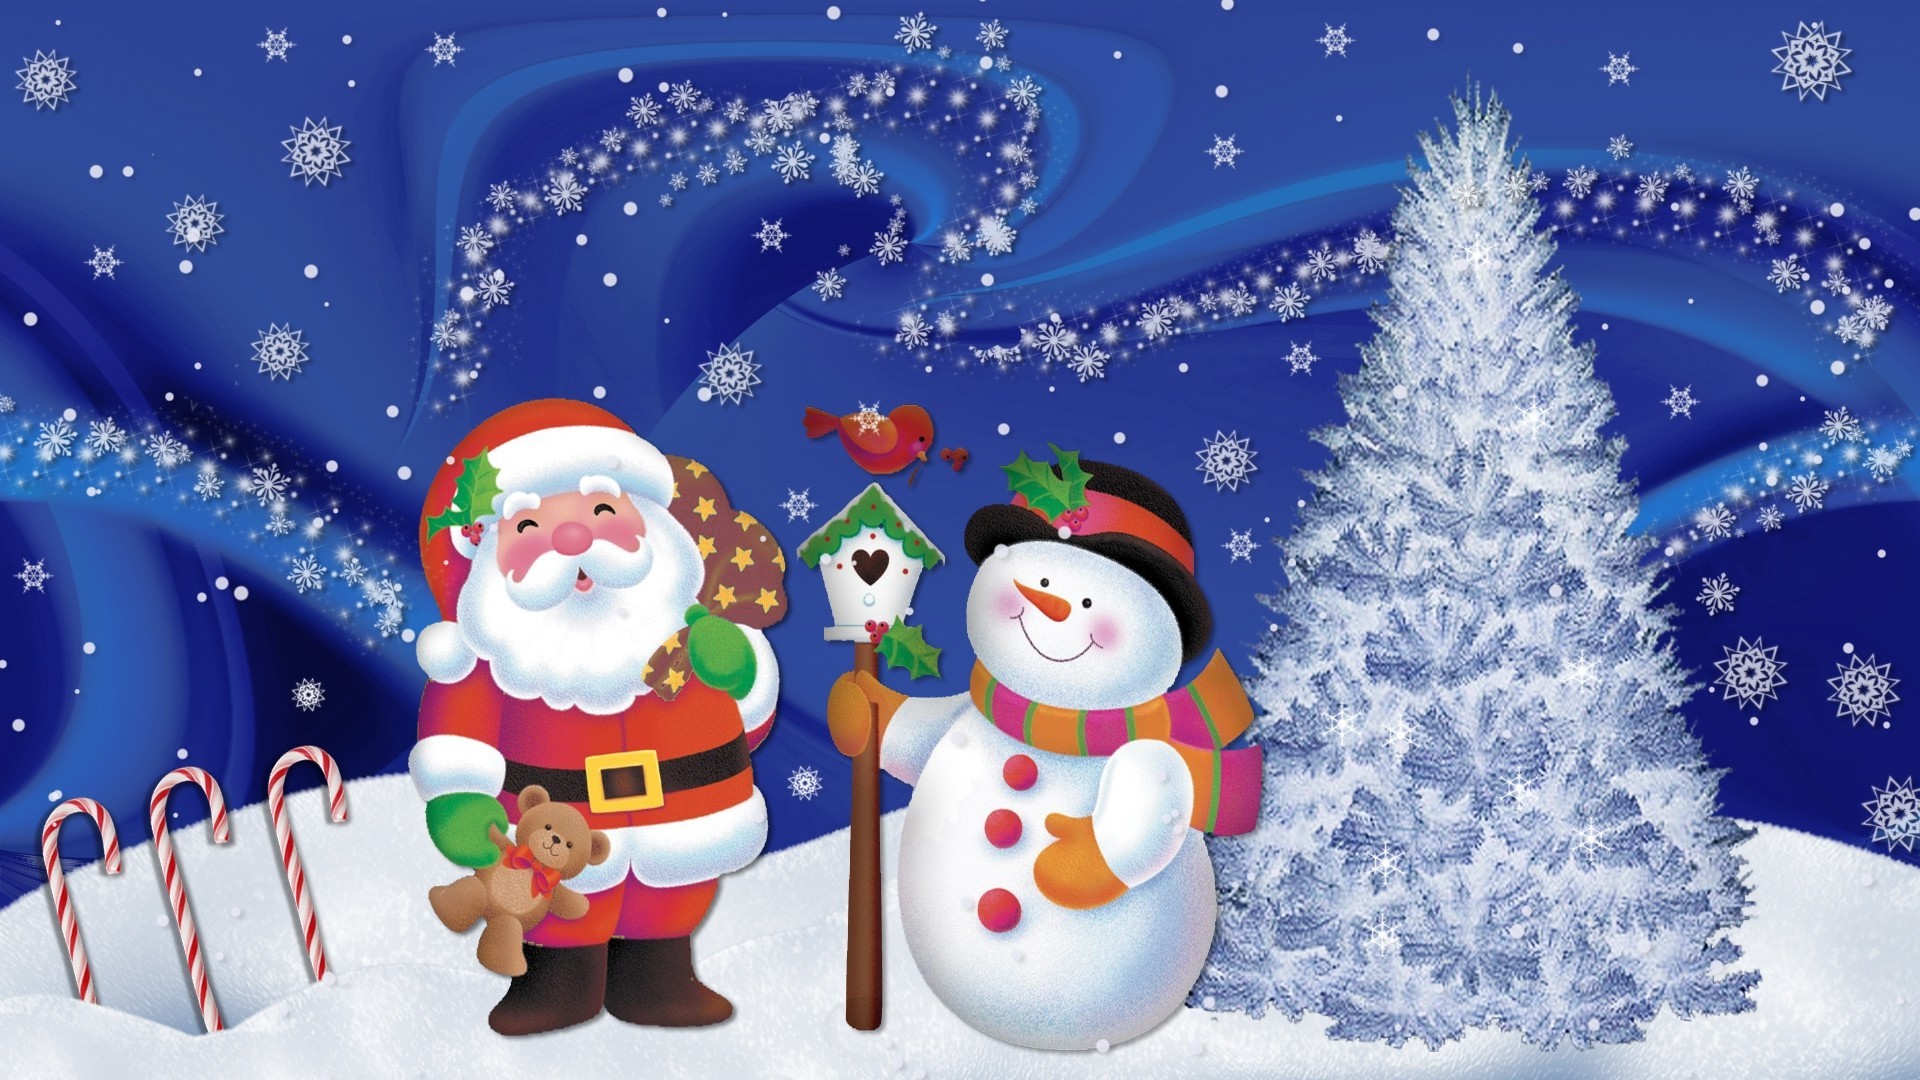 1920x1080 Christmas Wallpapers Animated Free | Hd Wallpapers Download